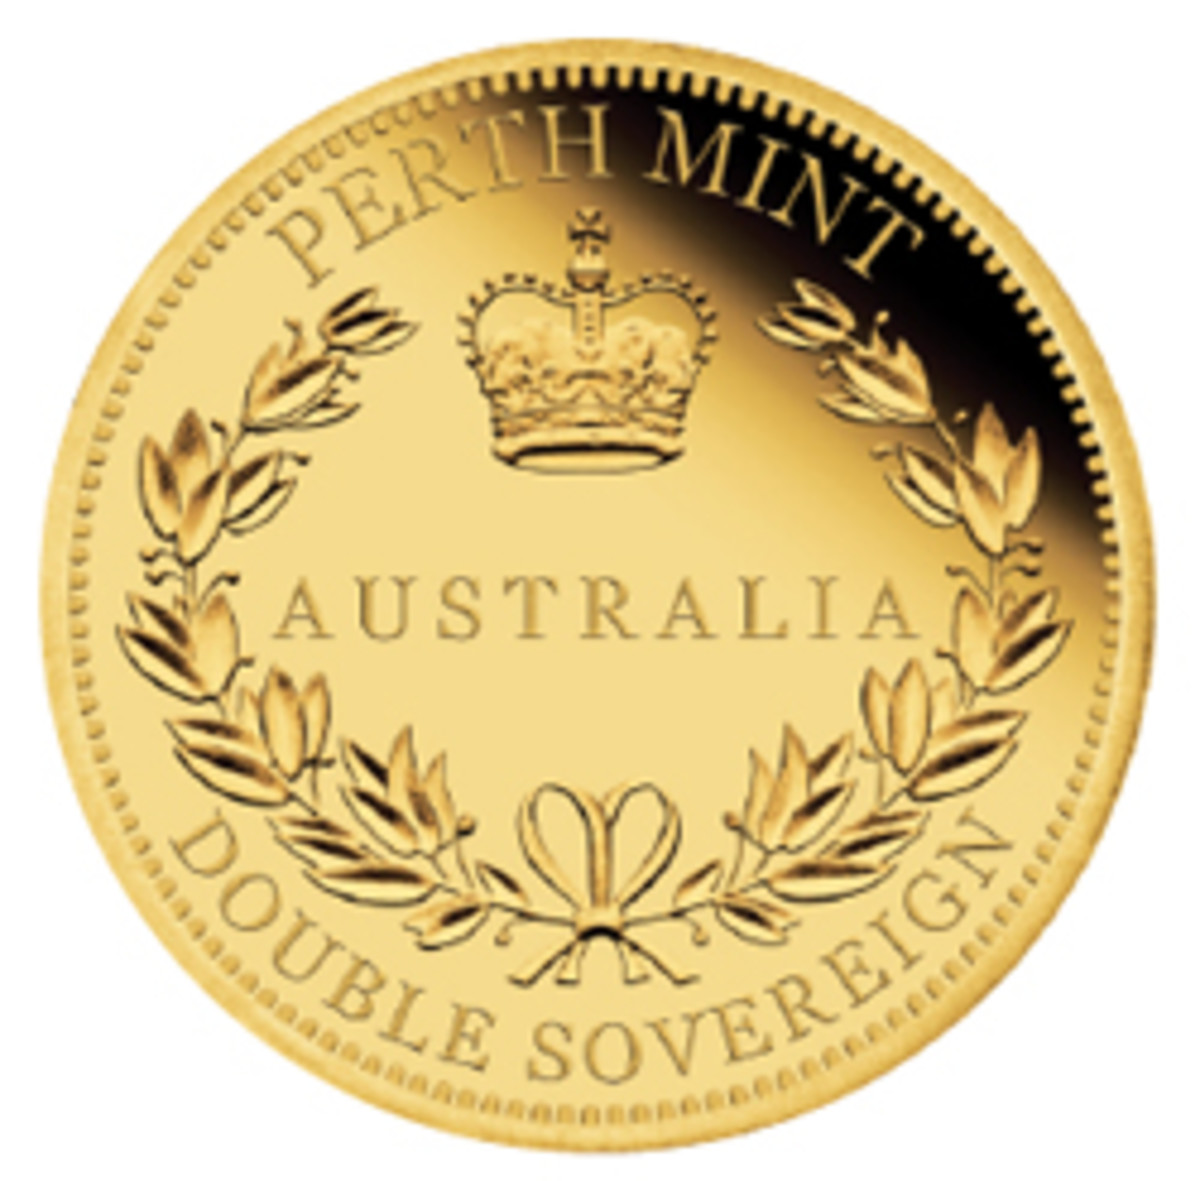  (Image courtesy and © The Perth Mint)